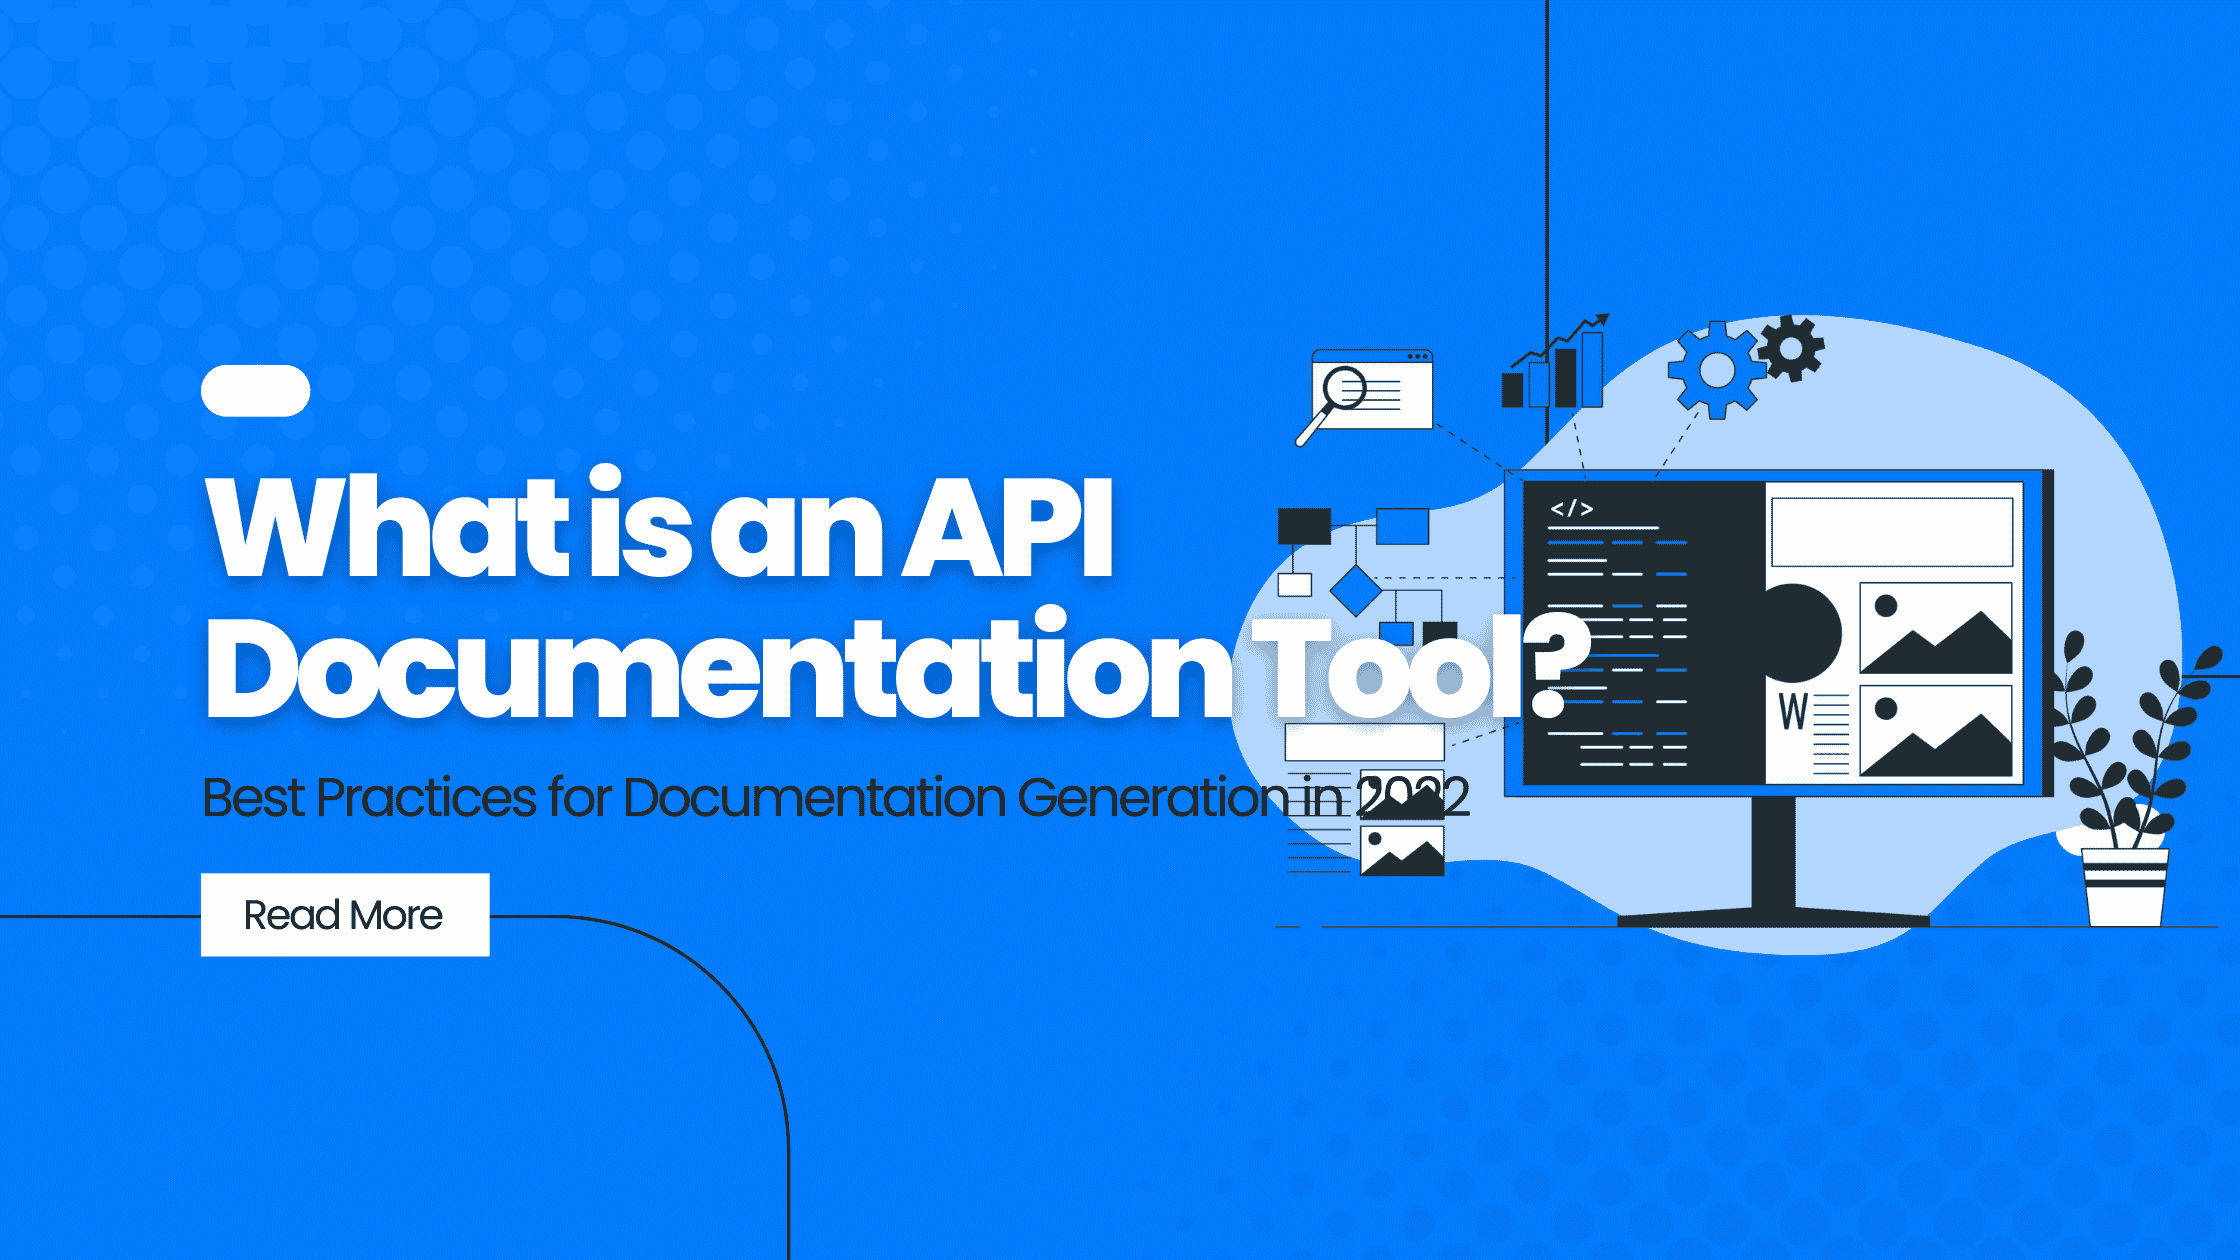 What is an API Documentation Tool